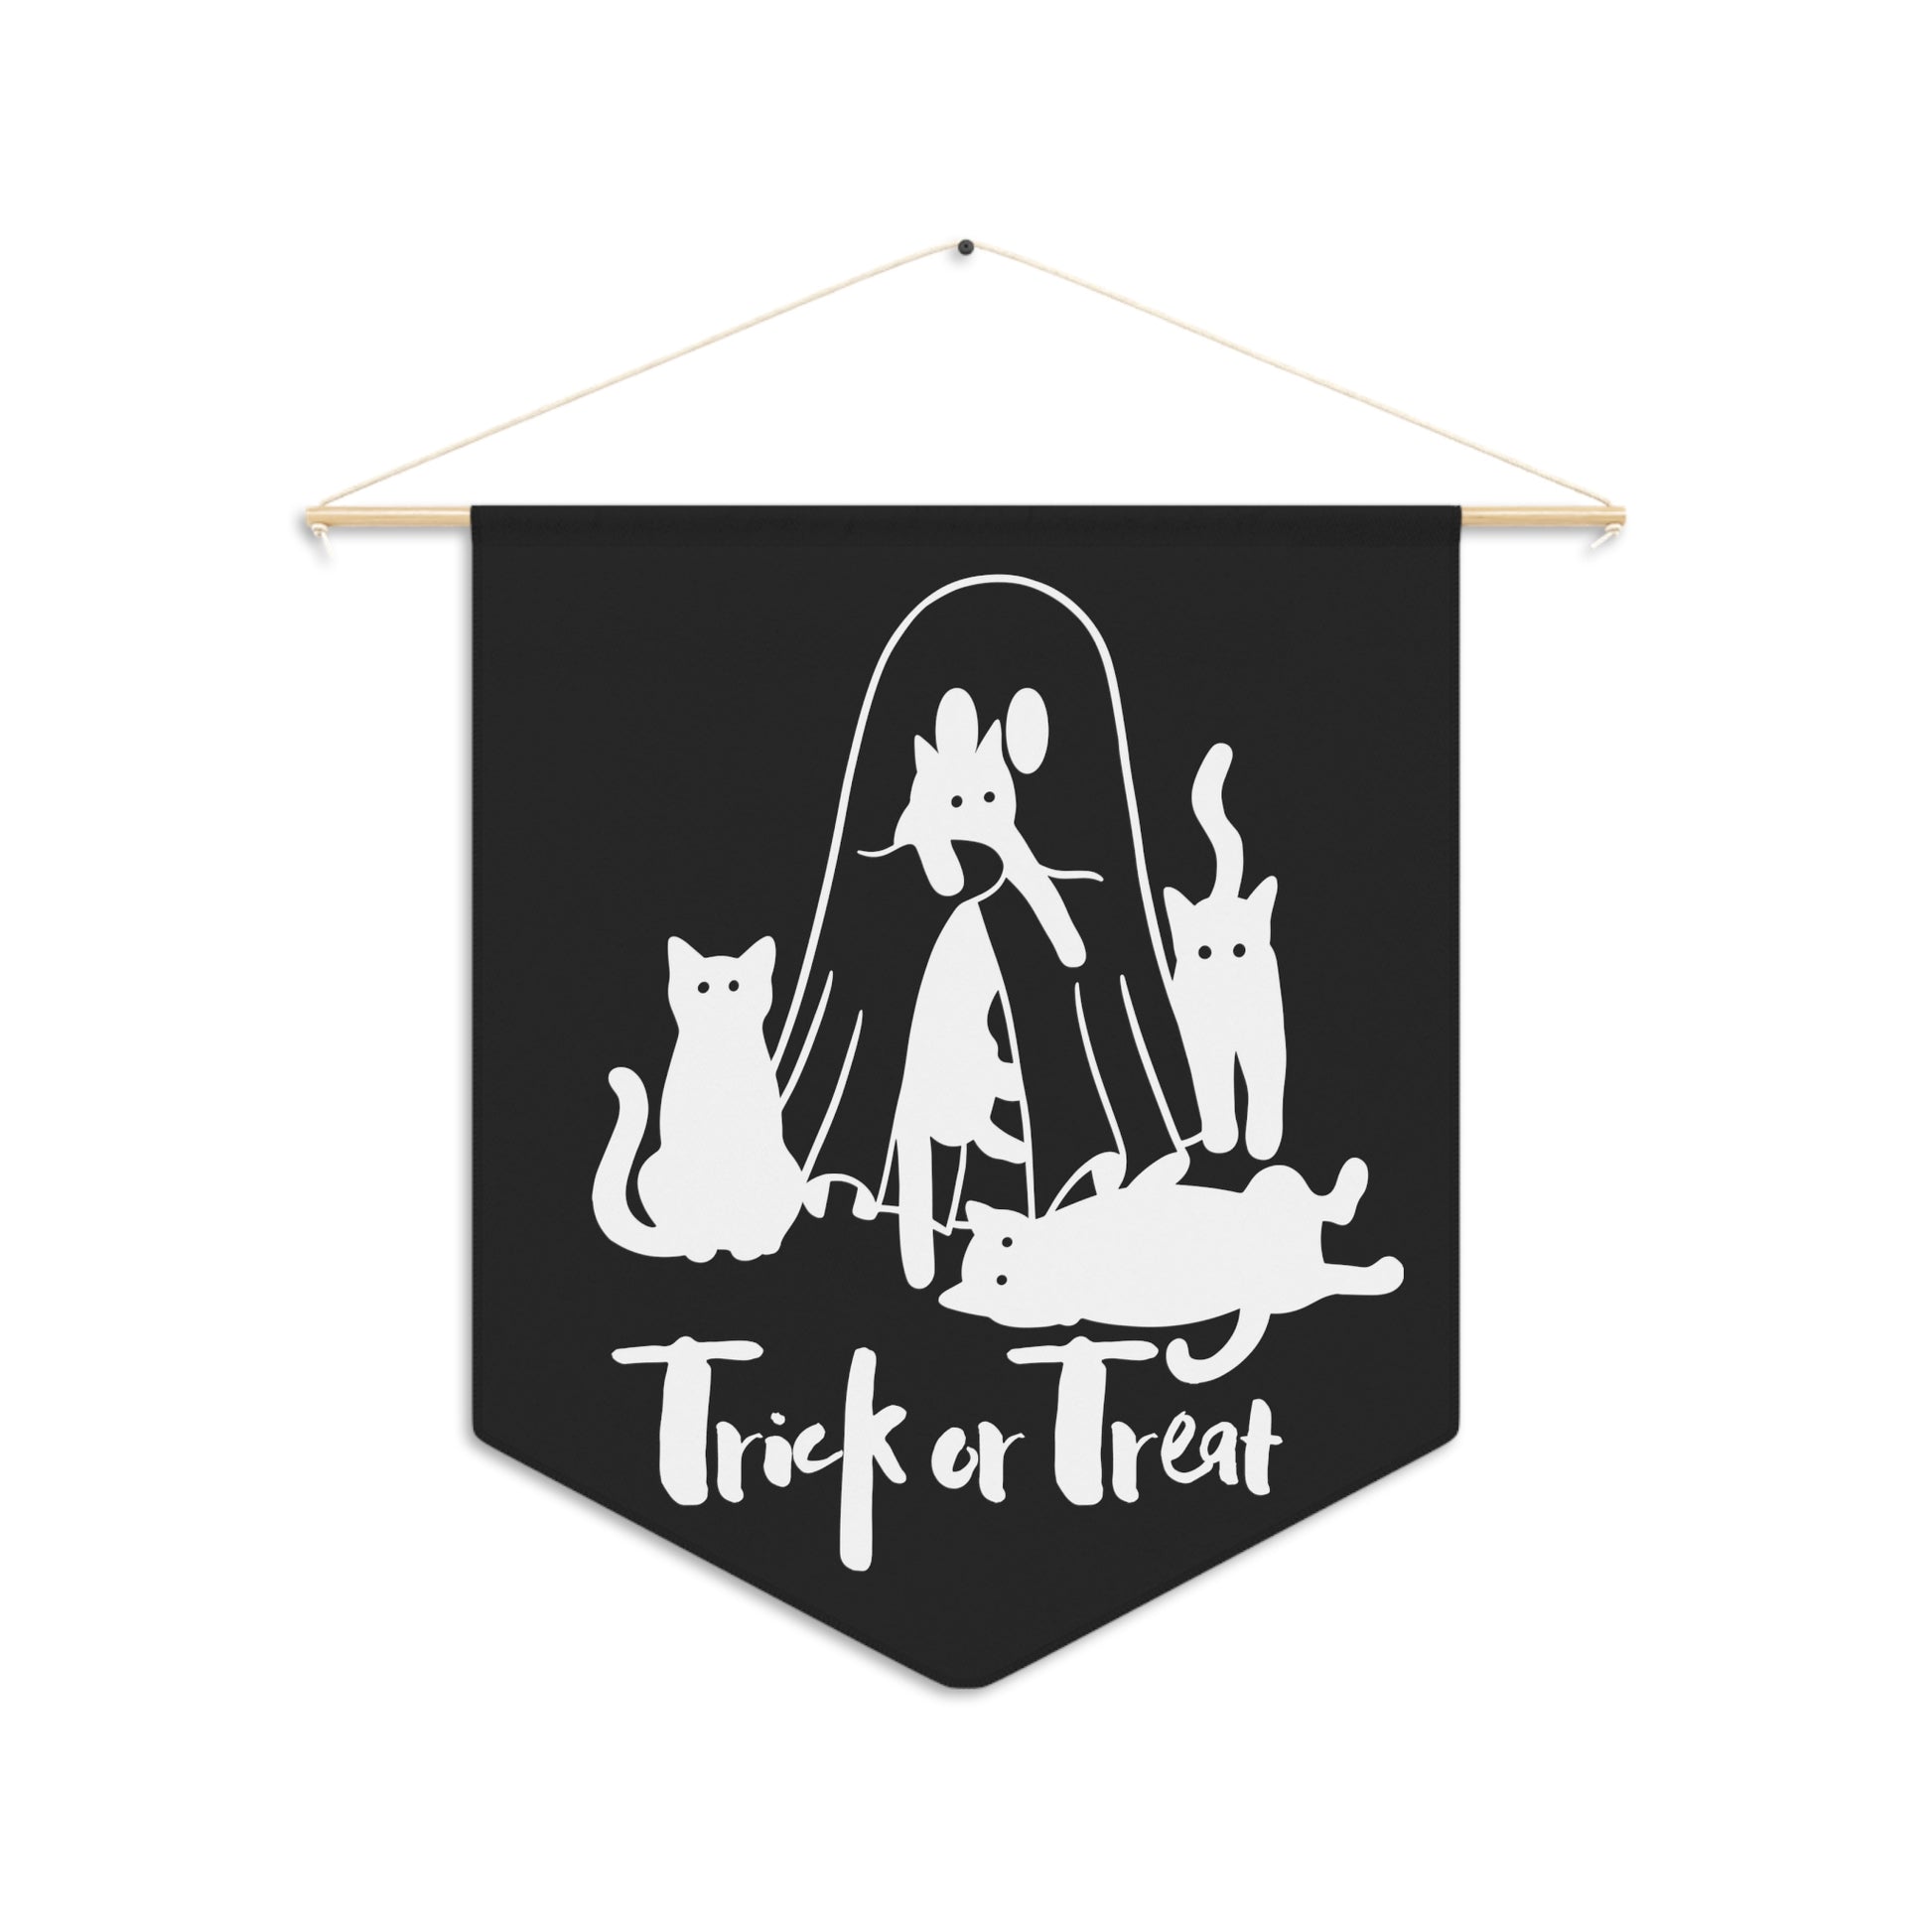 Ghost and cats pennant, Cat Halloween flag pennant, Spooky Season pennant, Black Cats Ghost Halloween home decor, Halloween Home accessory